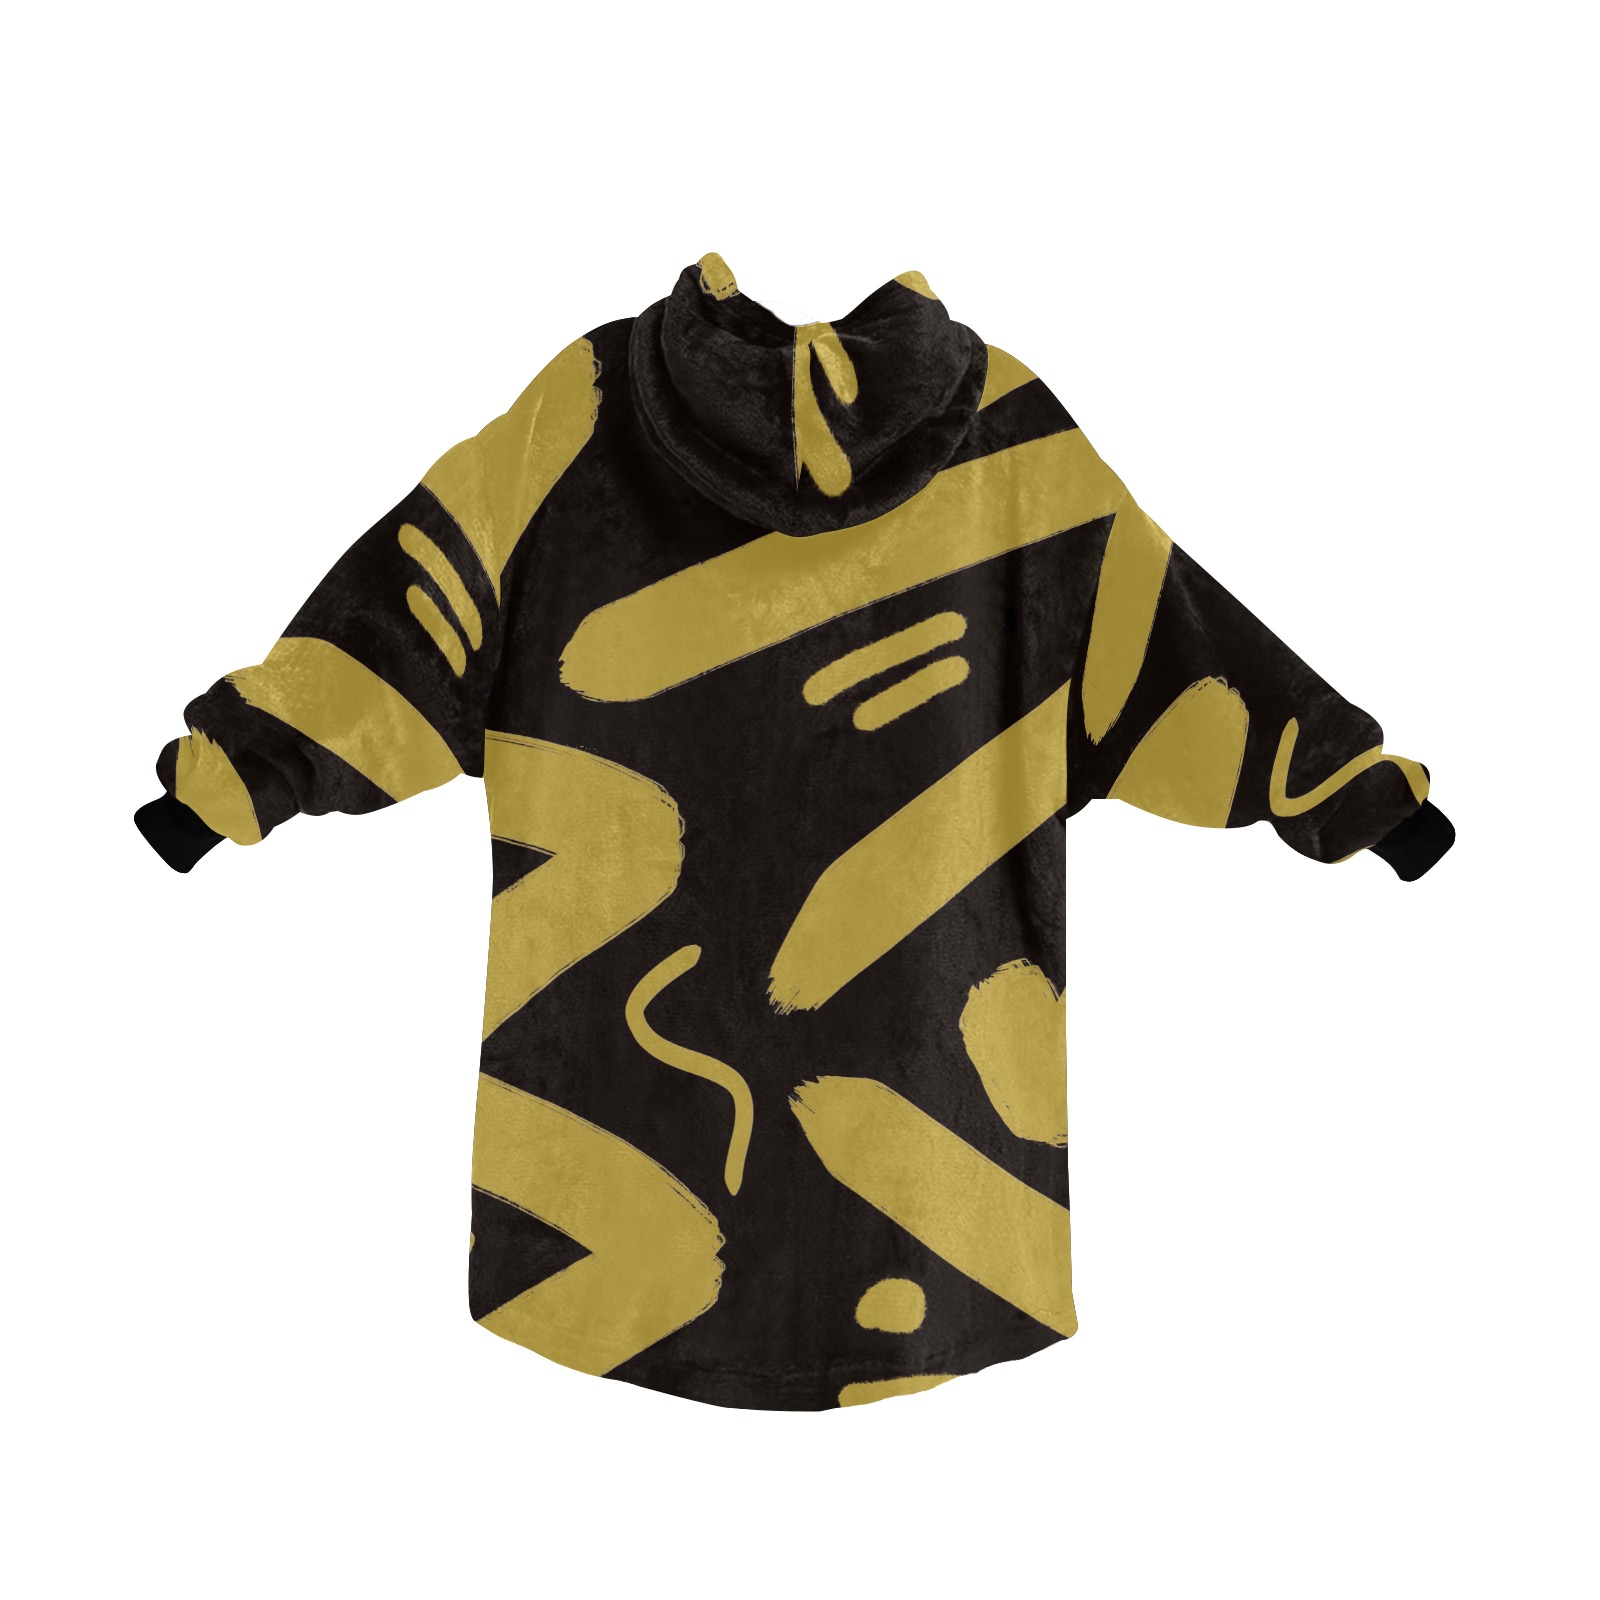 Tribal Black and Gold Blanket Hoodie for Women